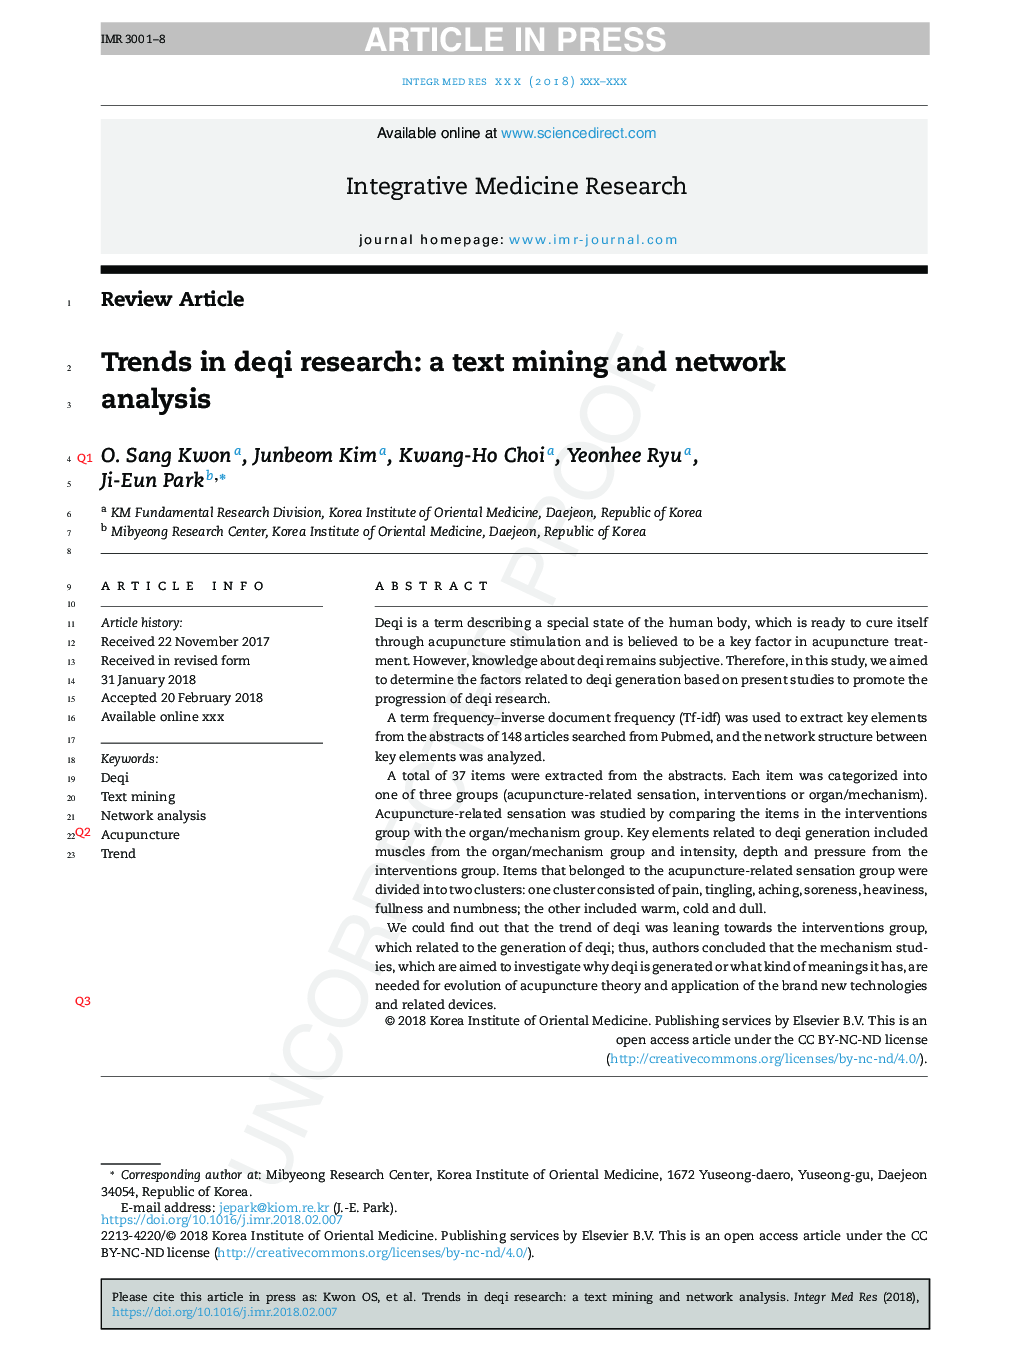 Trends in deqi research: a text mining and network analysis